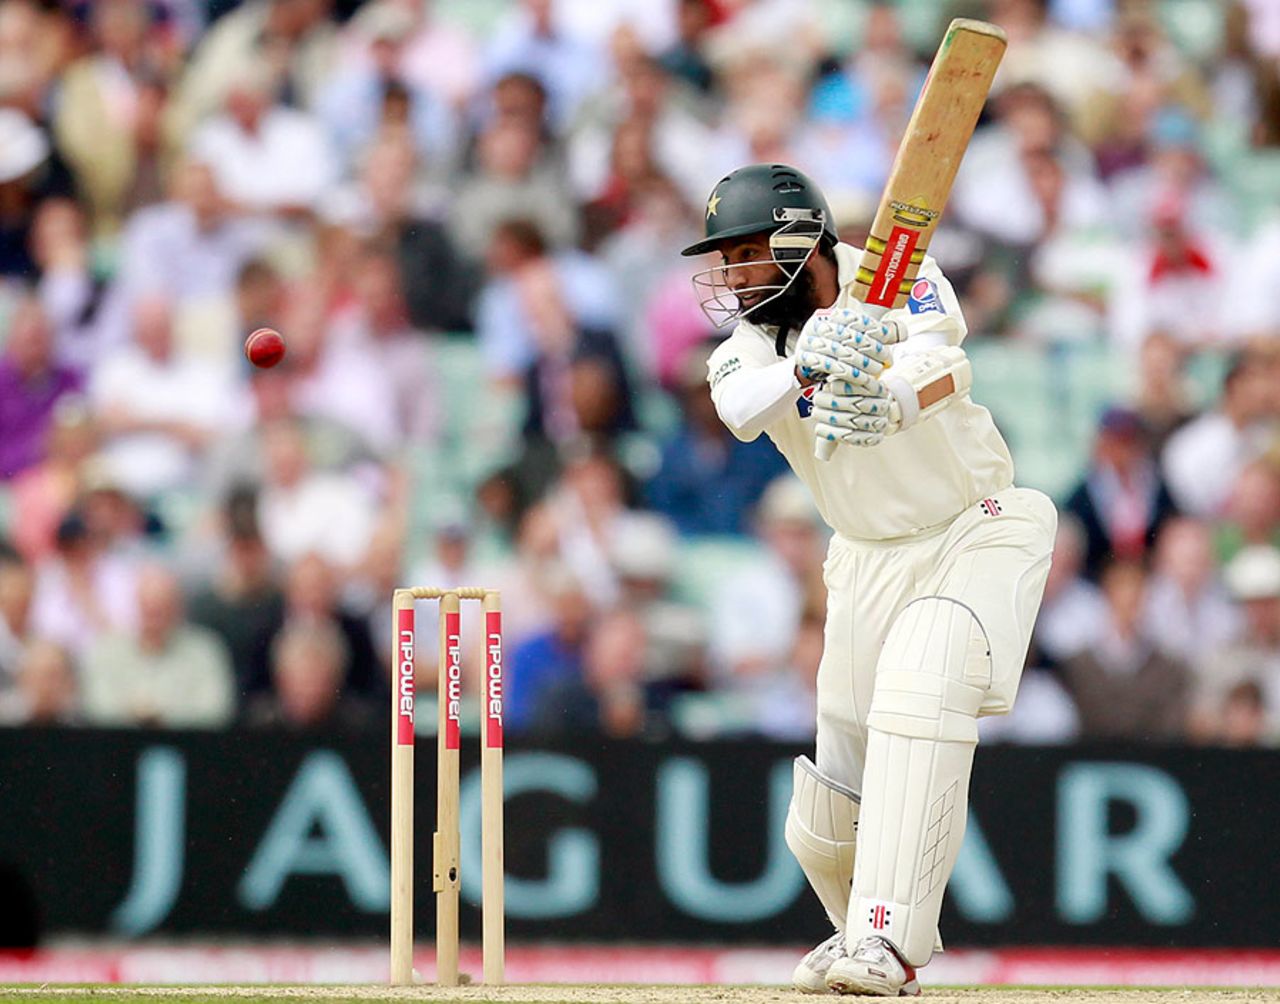 Mohammad Yousuf cuts on his way to a half-century, England v Pakistan, 3rd Test, The Oval, August 19, 2010